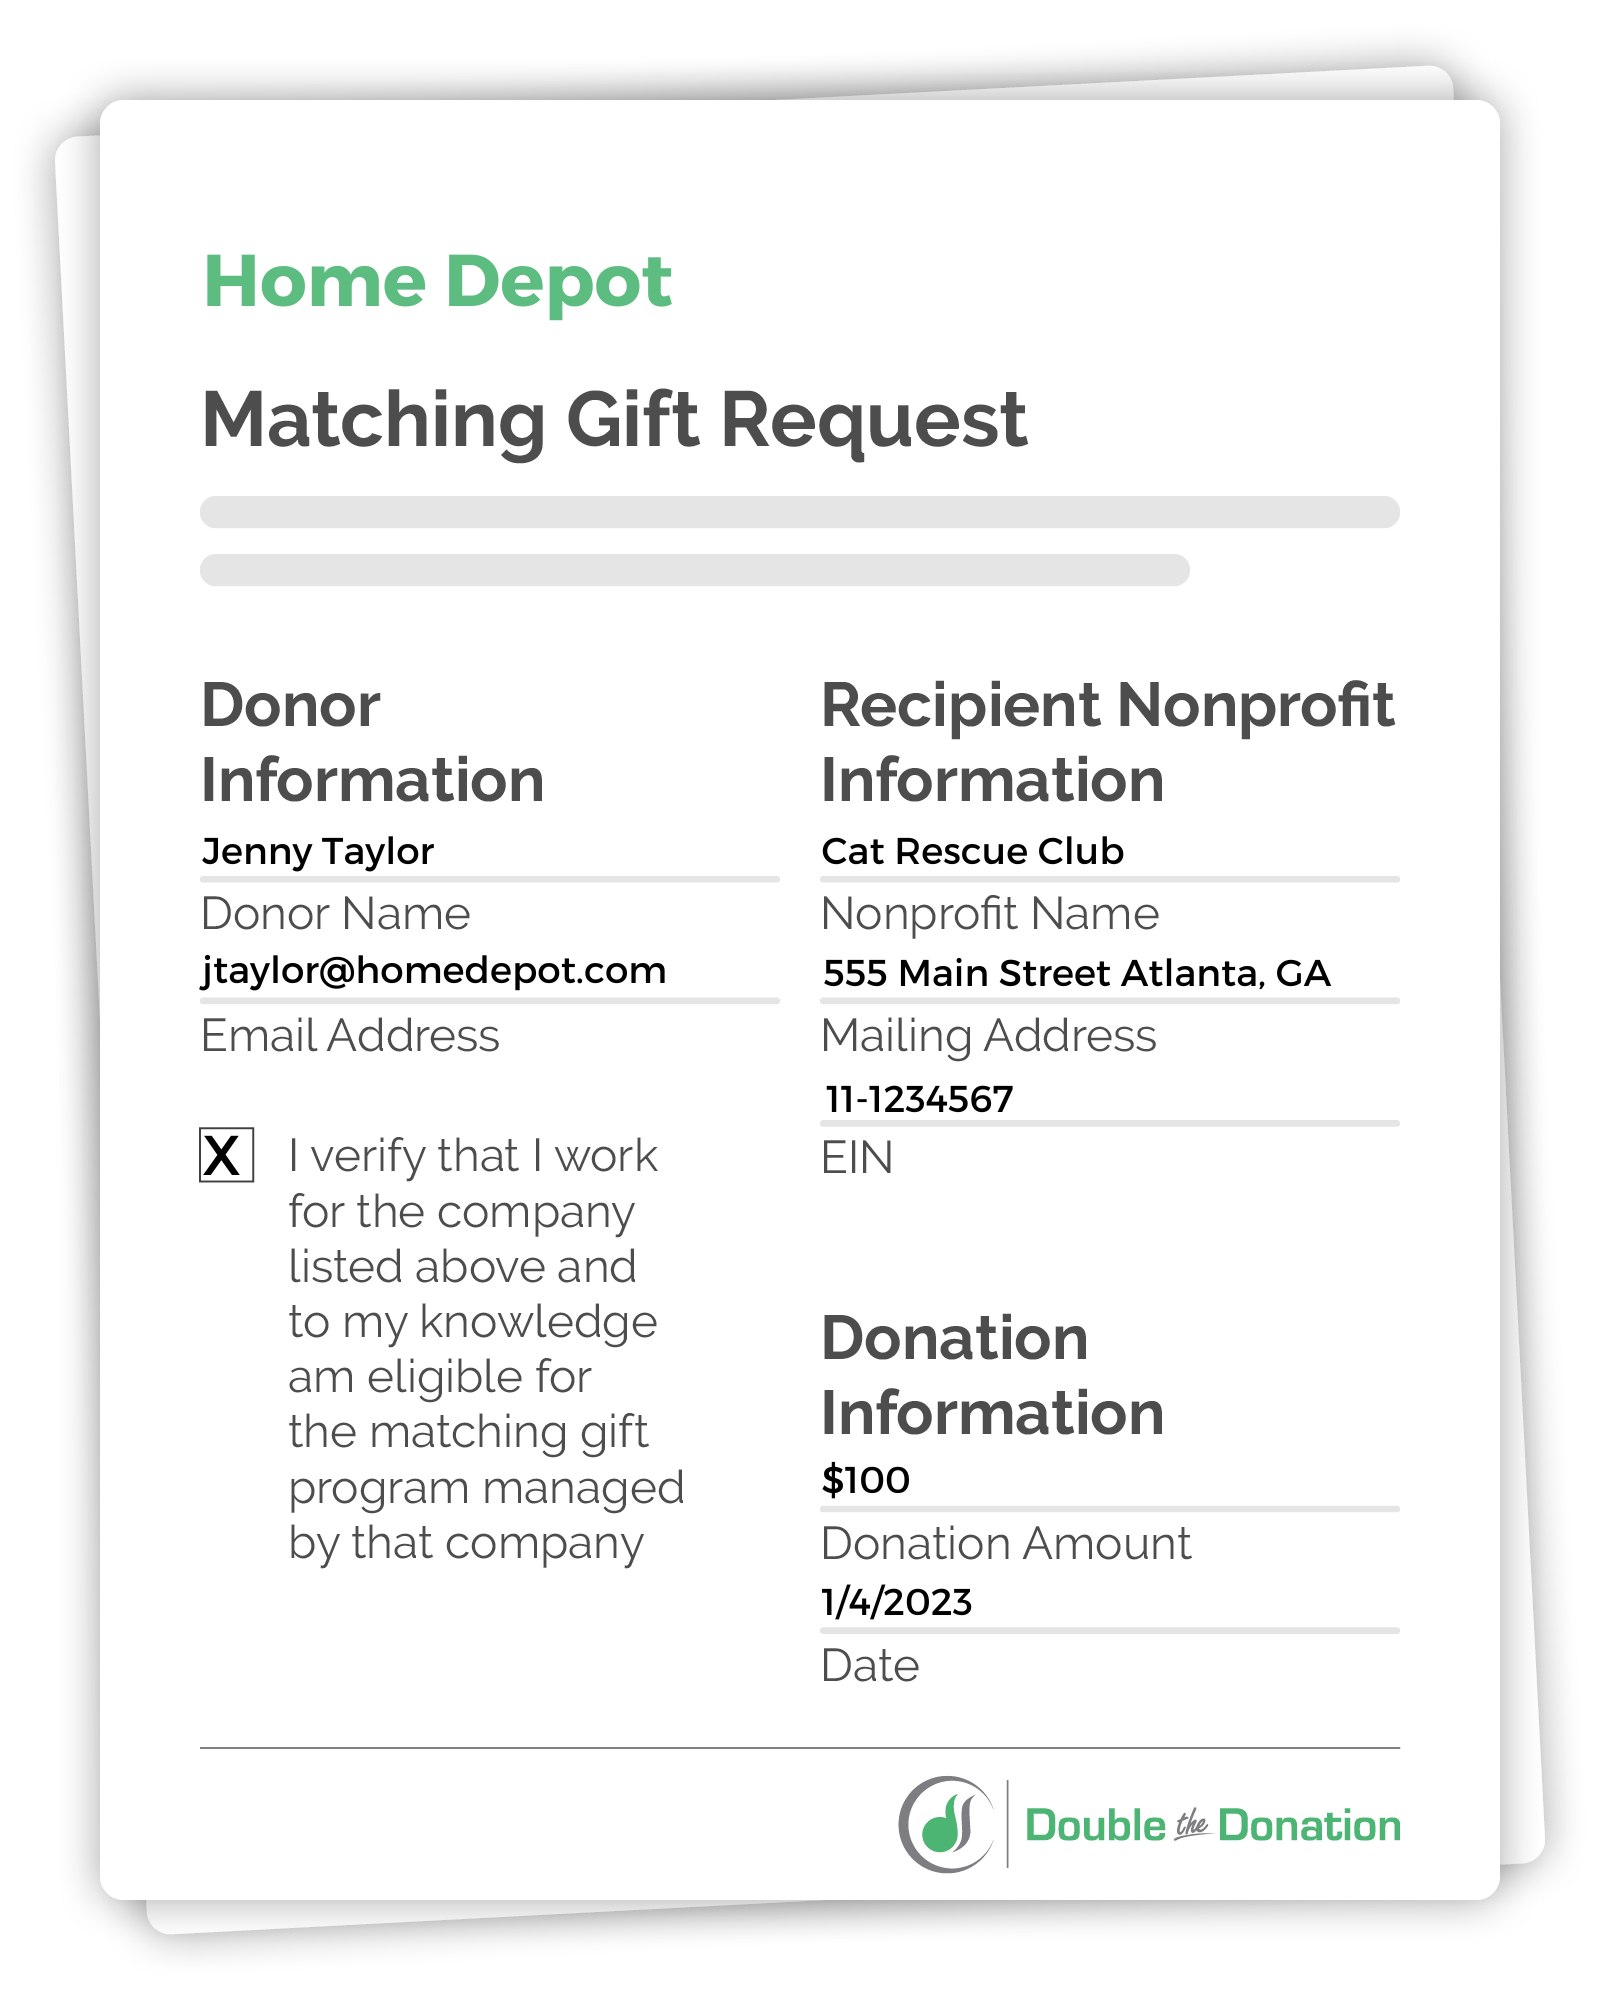 Behind-the-scenes submission for one-off matching gift programs using the standard form